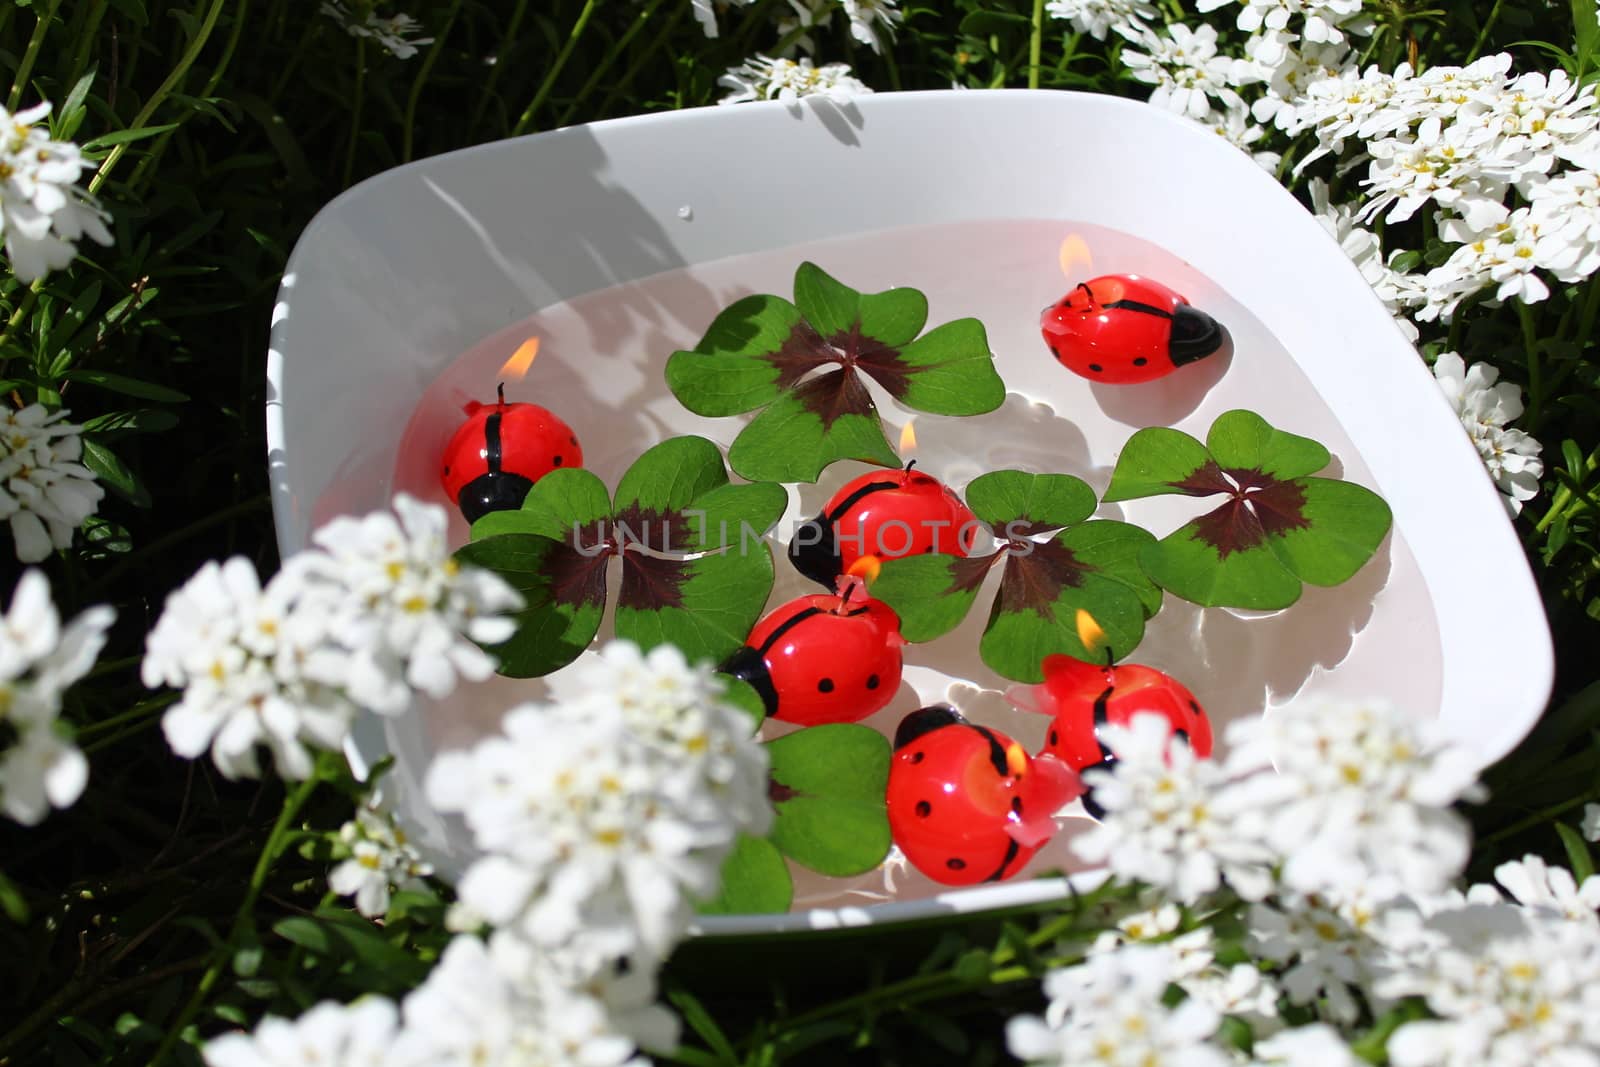 ladybird candles and lucky clover in a bowl by martina_unbehauen